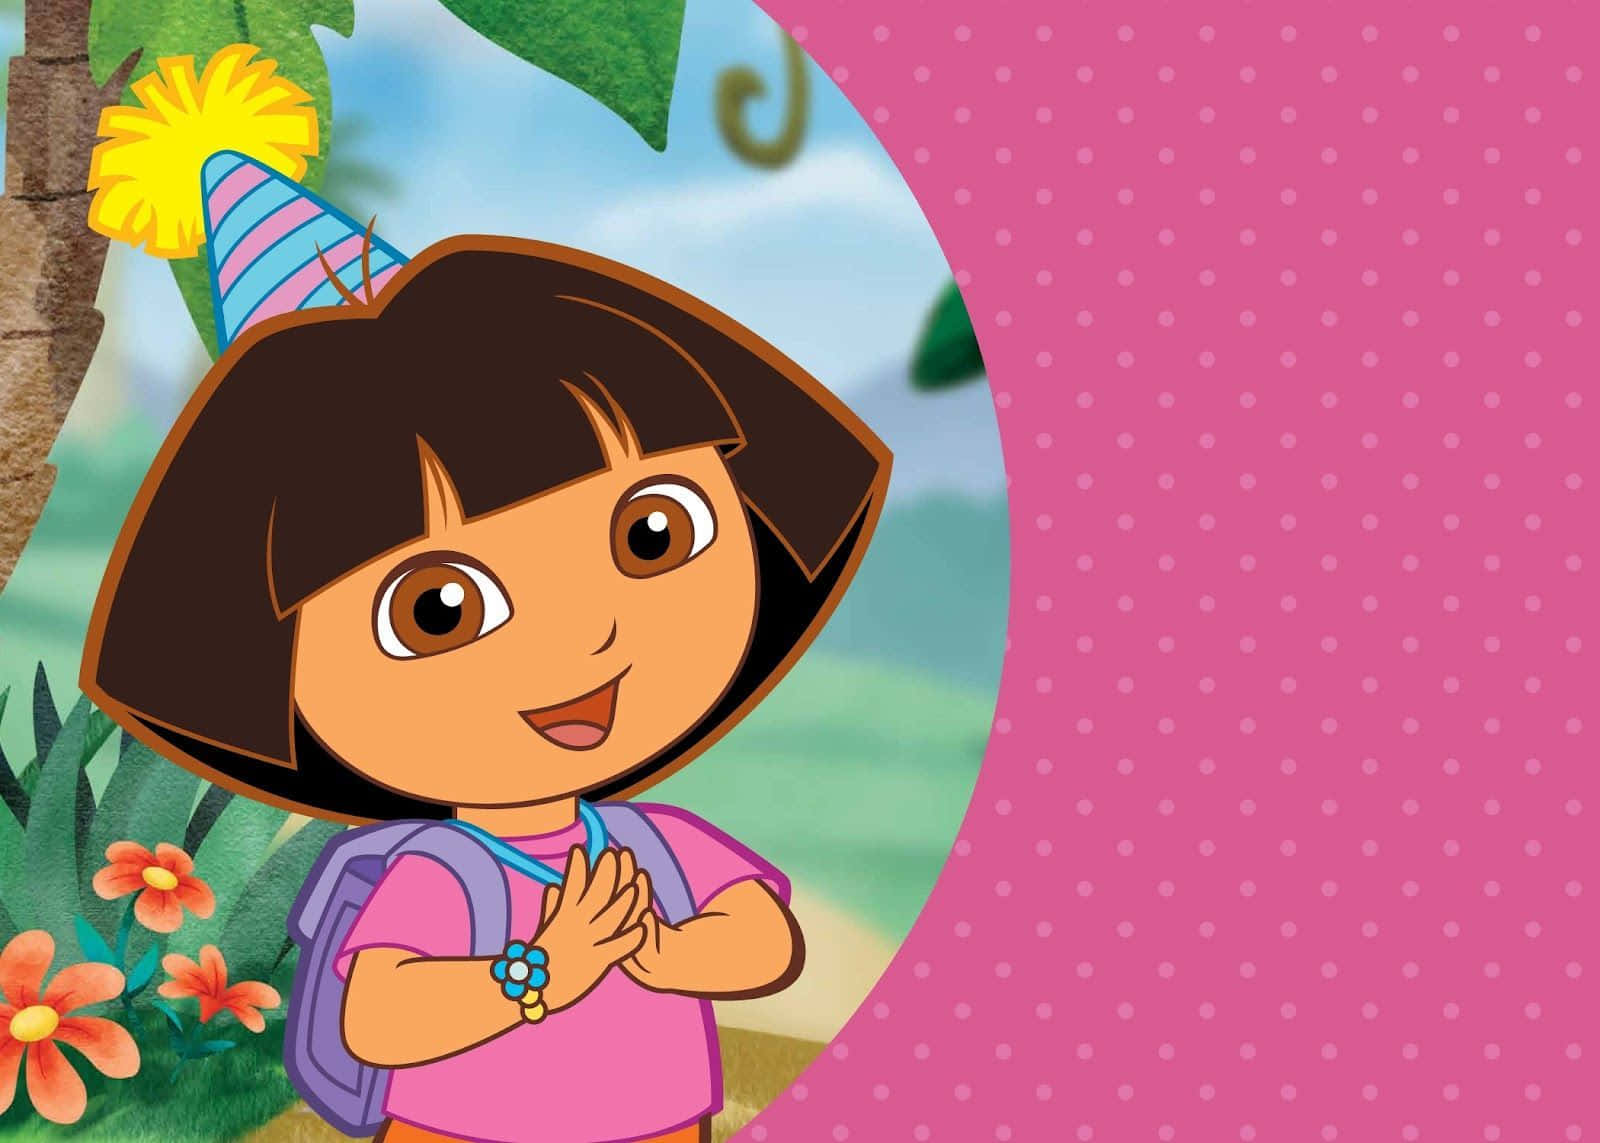 "Discover amazing new places with Dora The Explorer!"